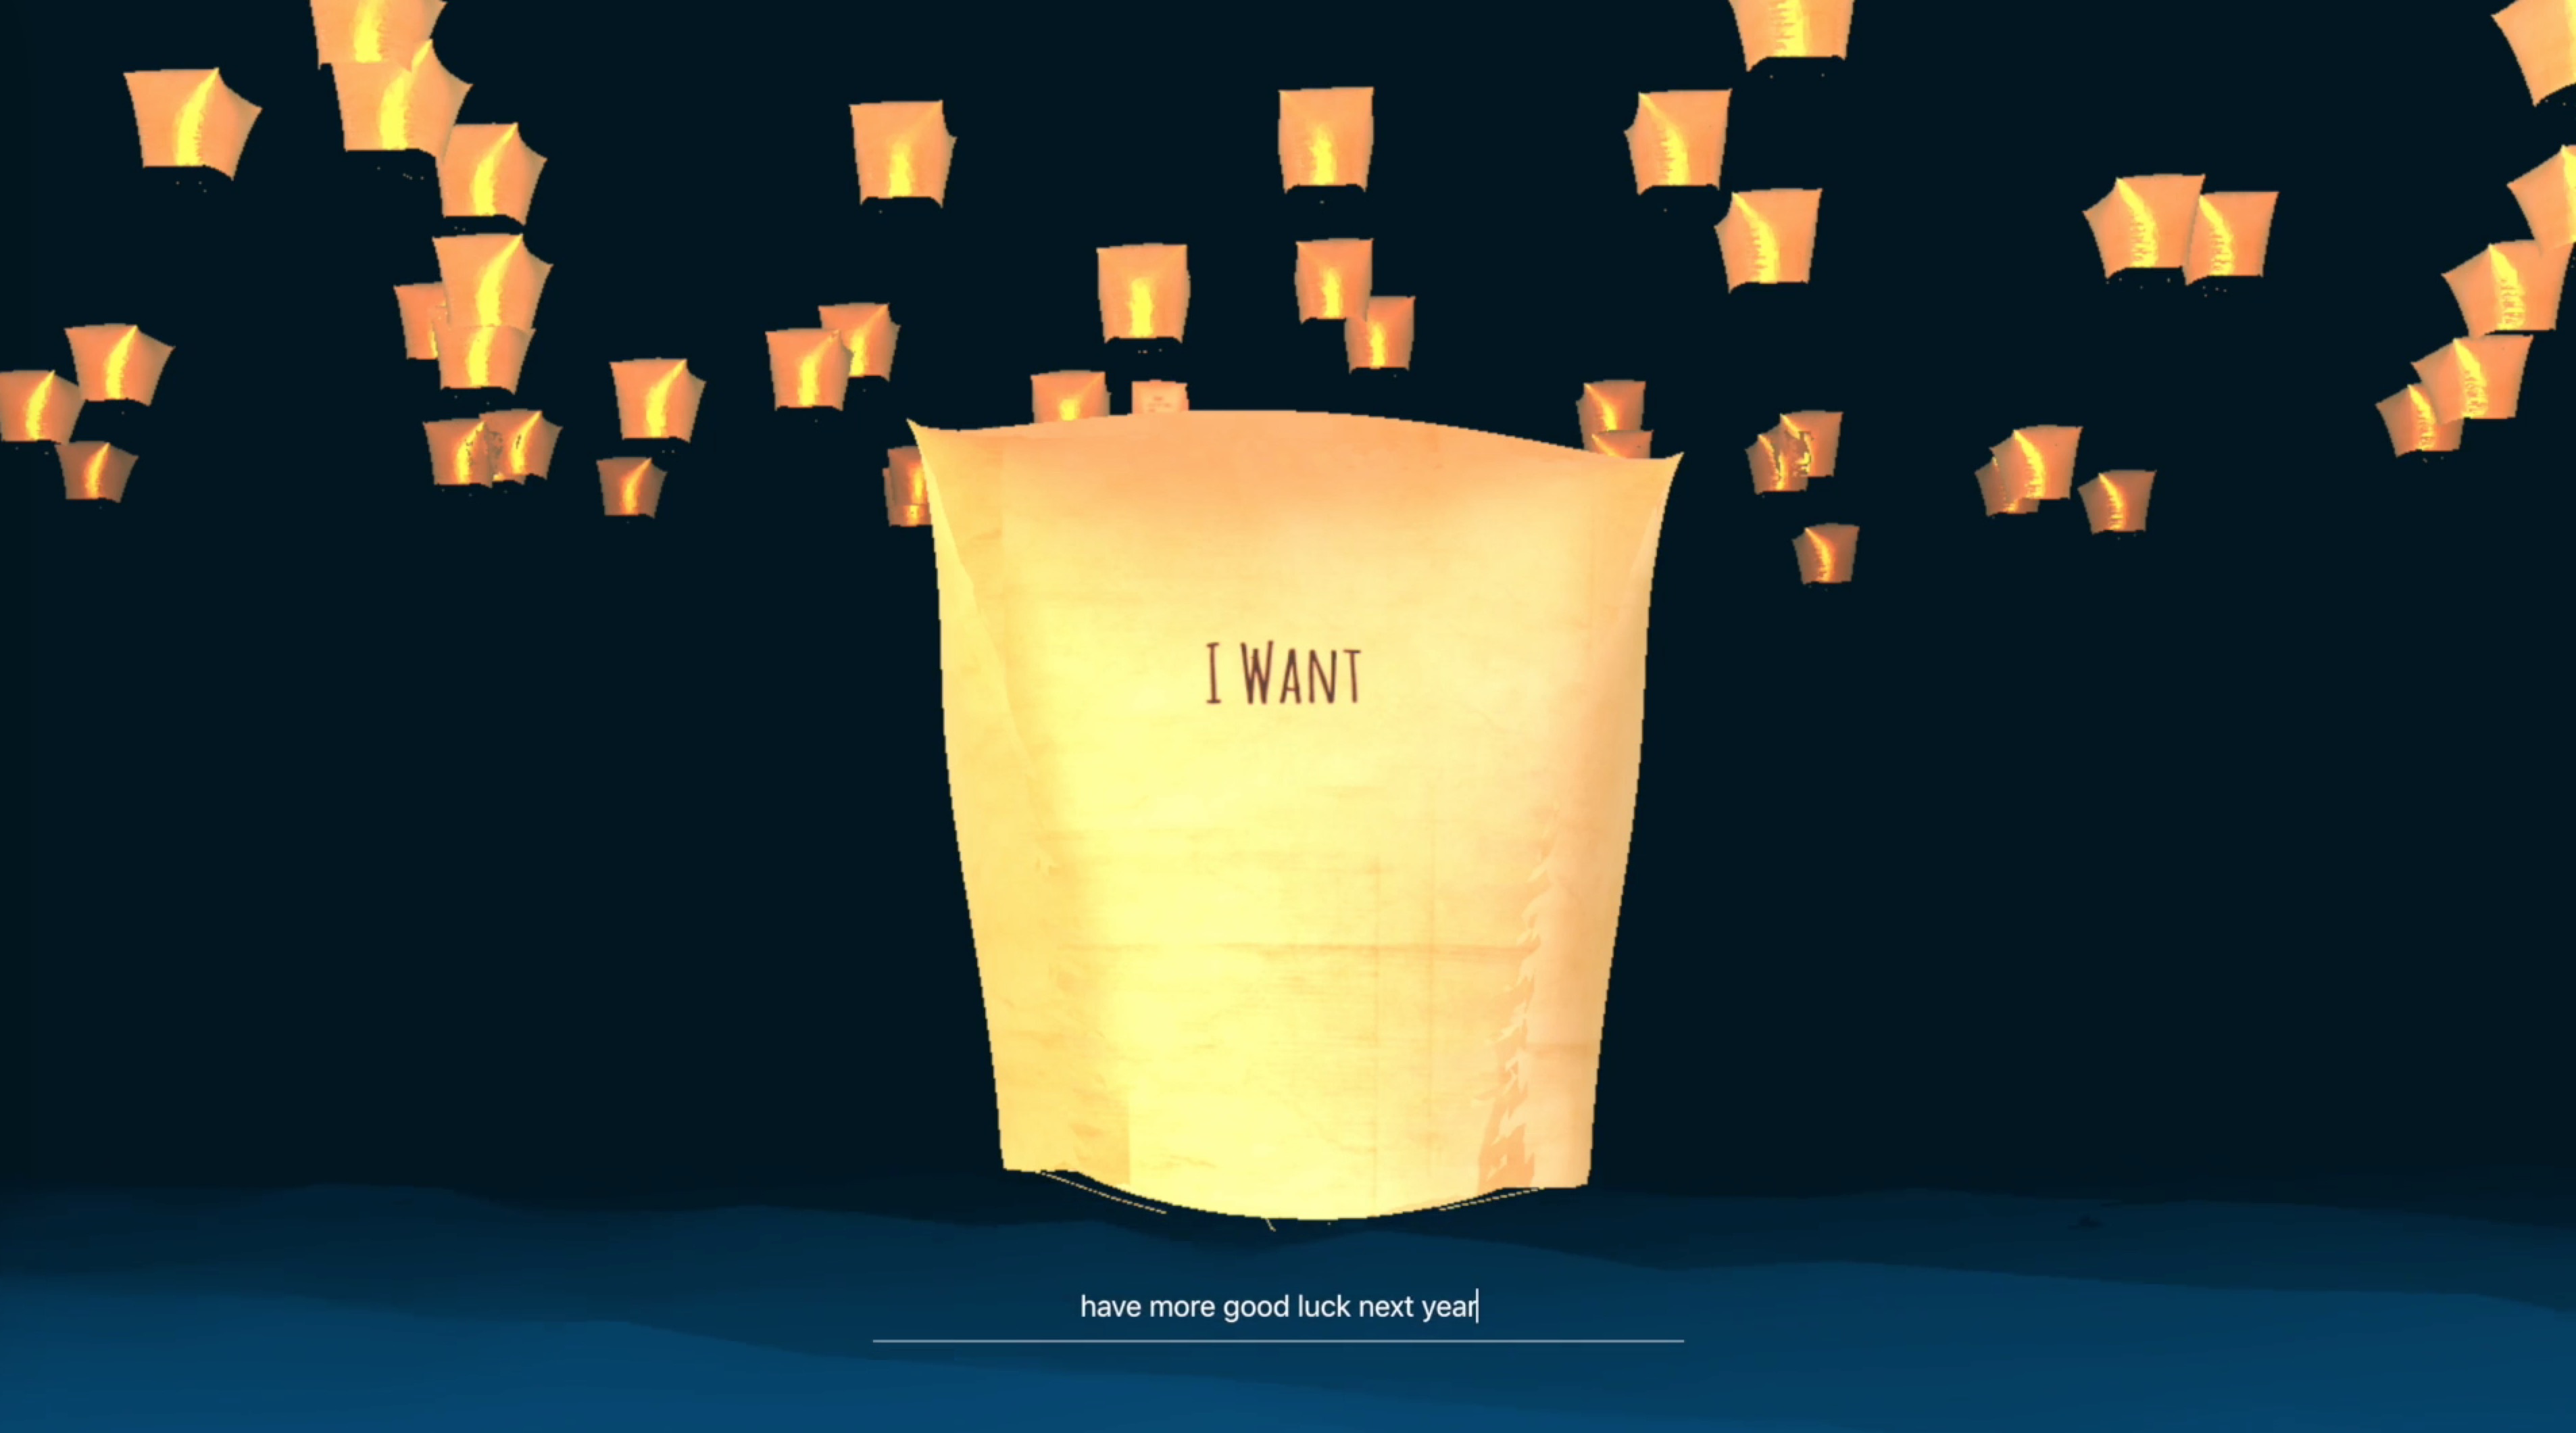 3D Interactive Web application about wishes.